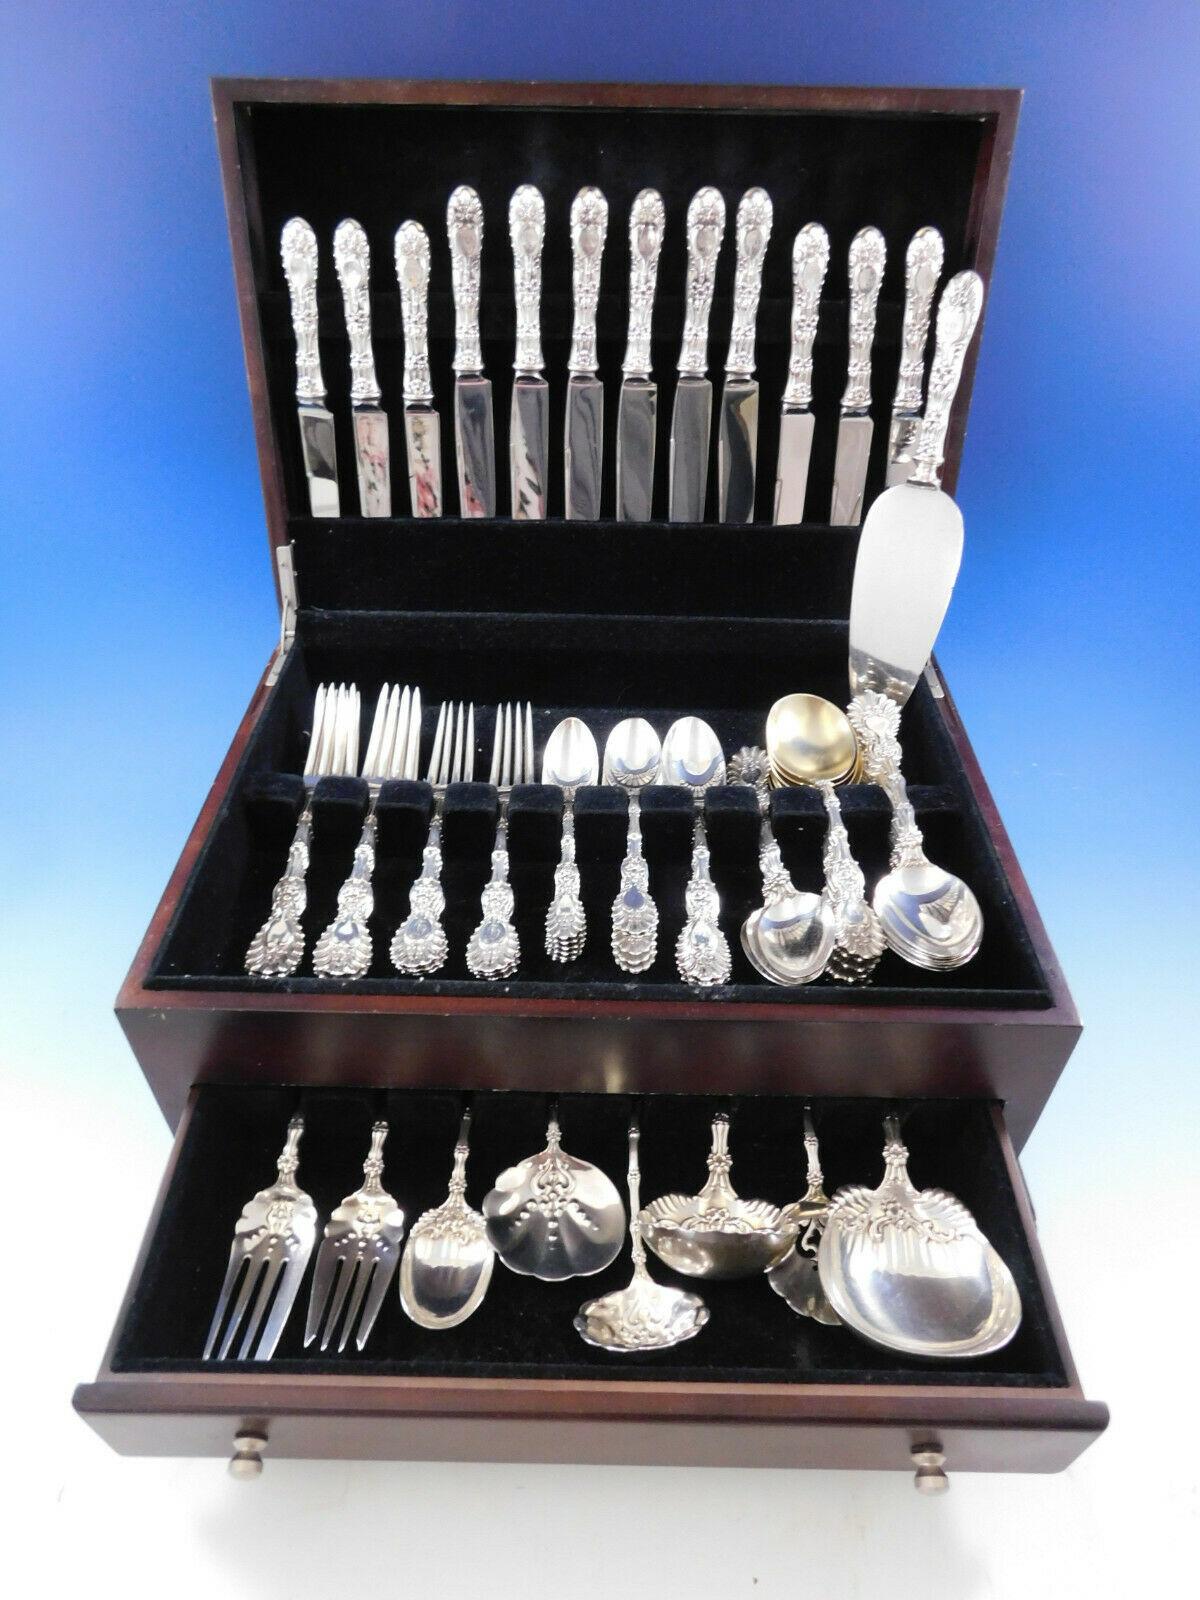 Superb radiant by Whiting sterling silver flatware set - 63 pieces. This scarce pattern was introduced by Whiting in the year 1895. This set includes:

6 knives, 8 7/8